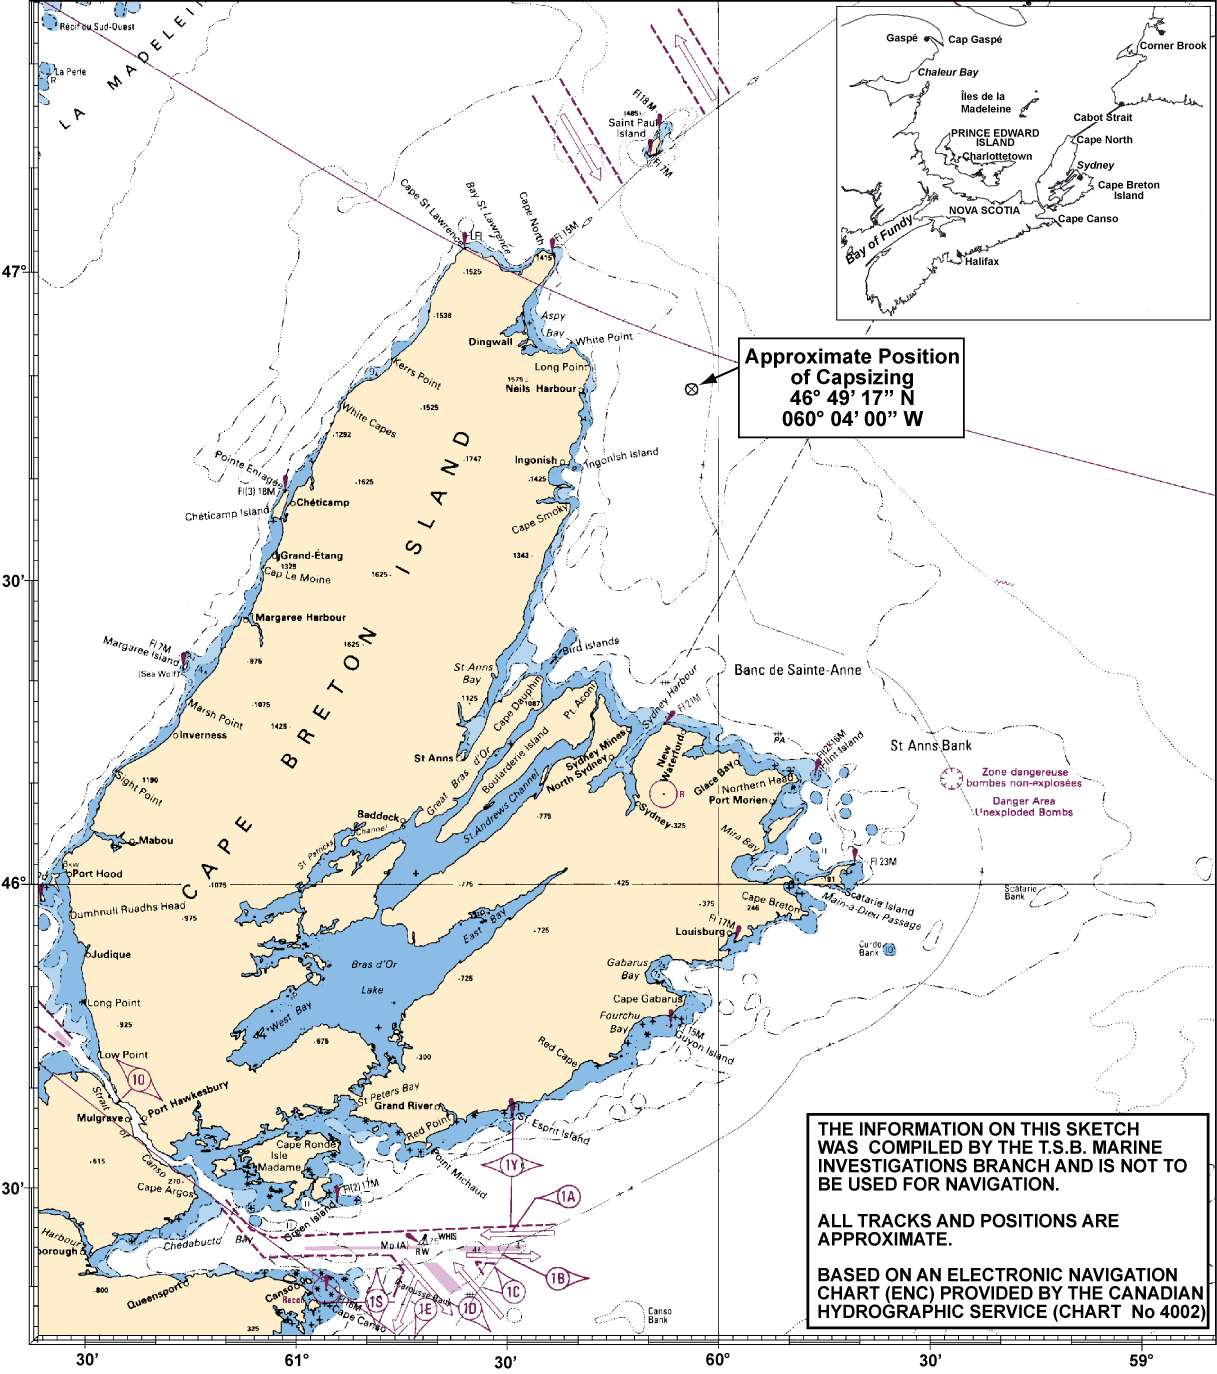 Appendix B - Sketch of occurrence area